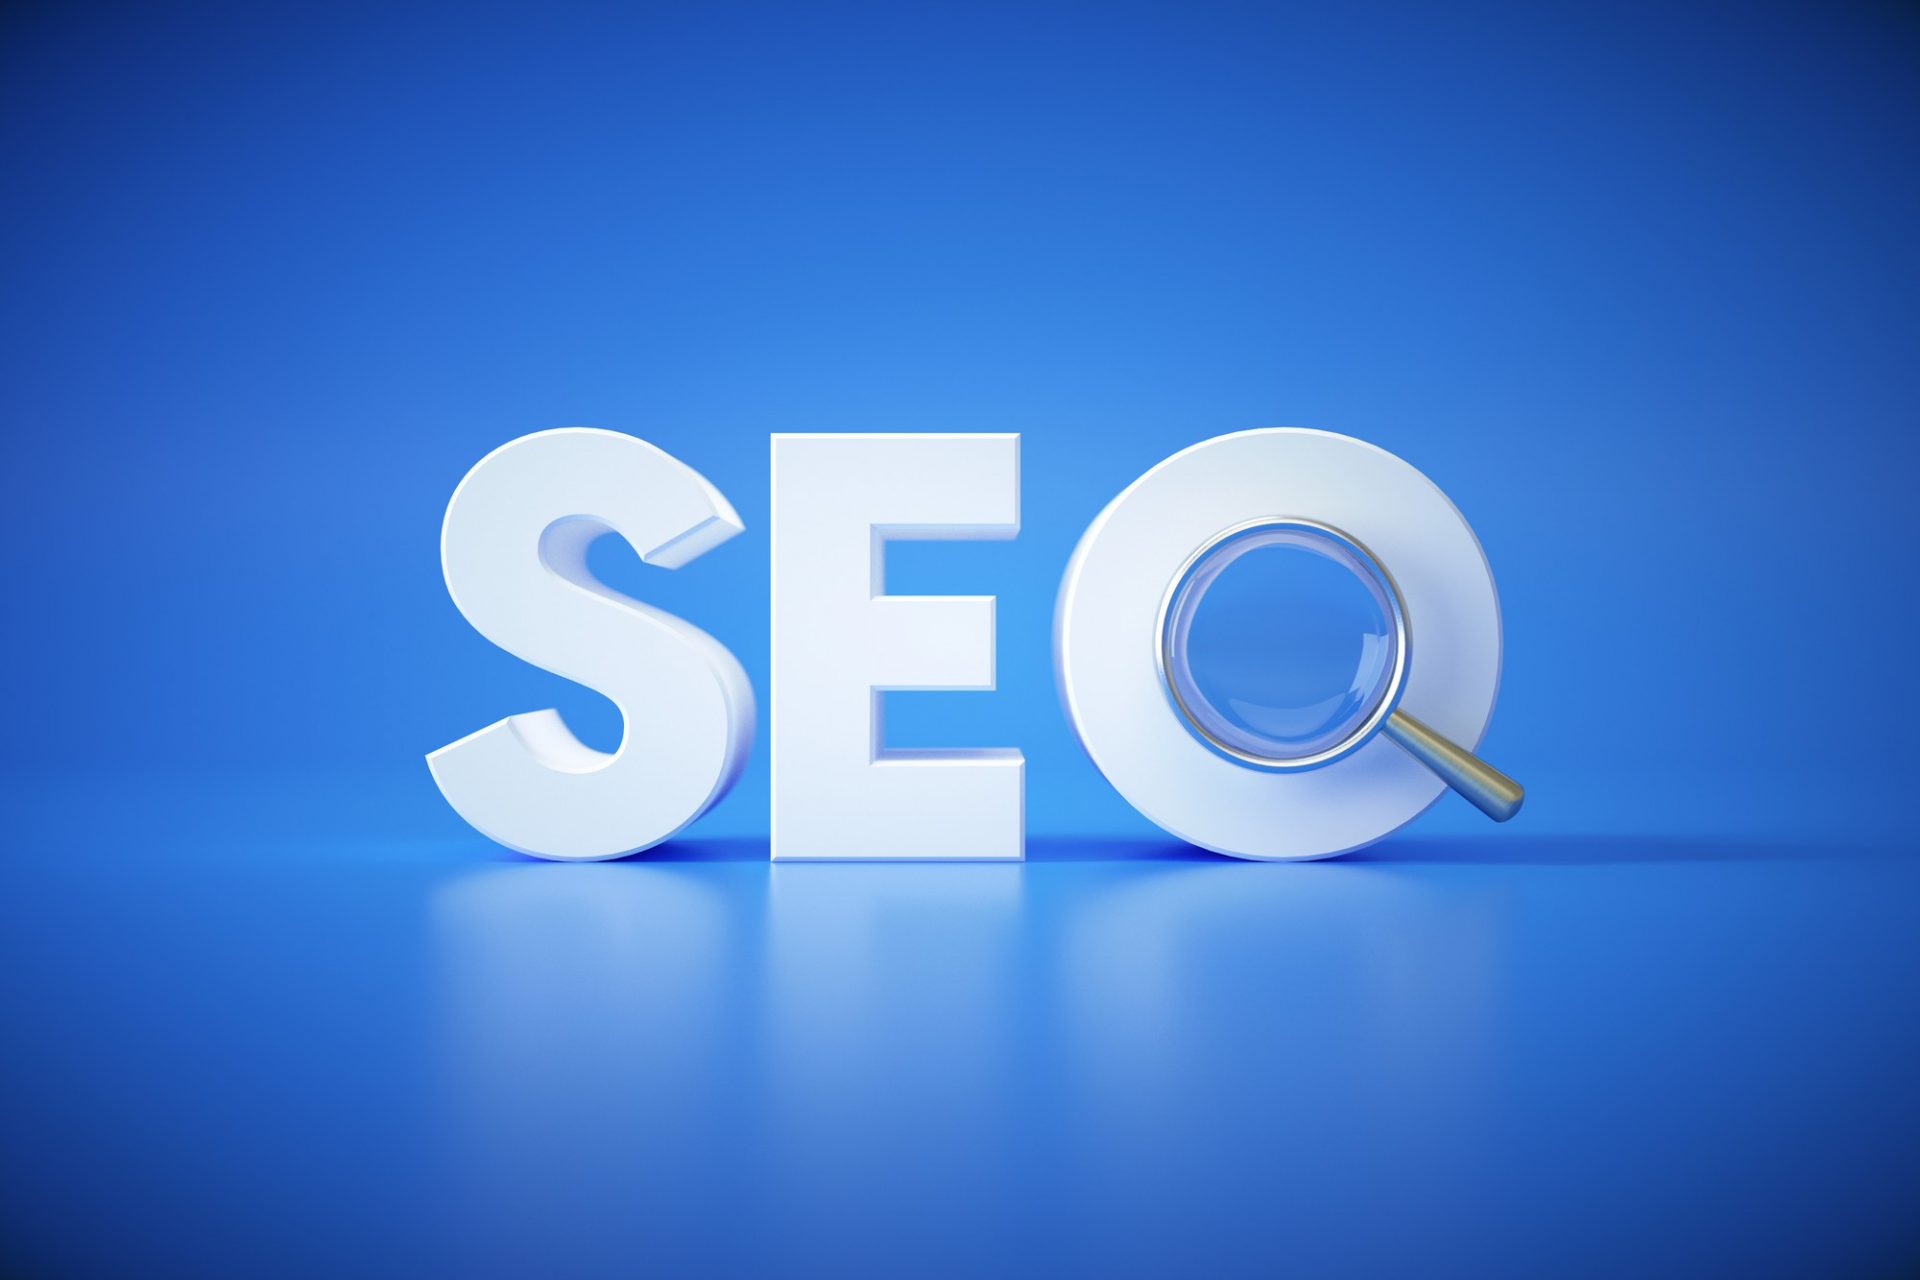 Why Do Schools Need to Care About SEO? - Blogging - Lorelei Web